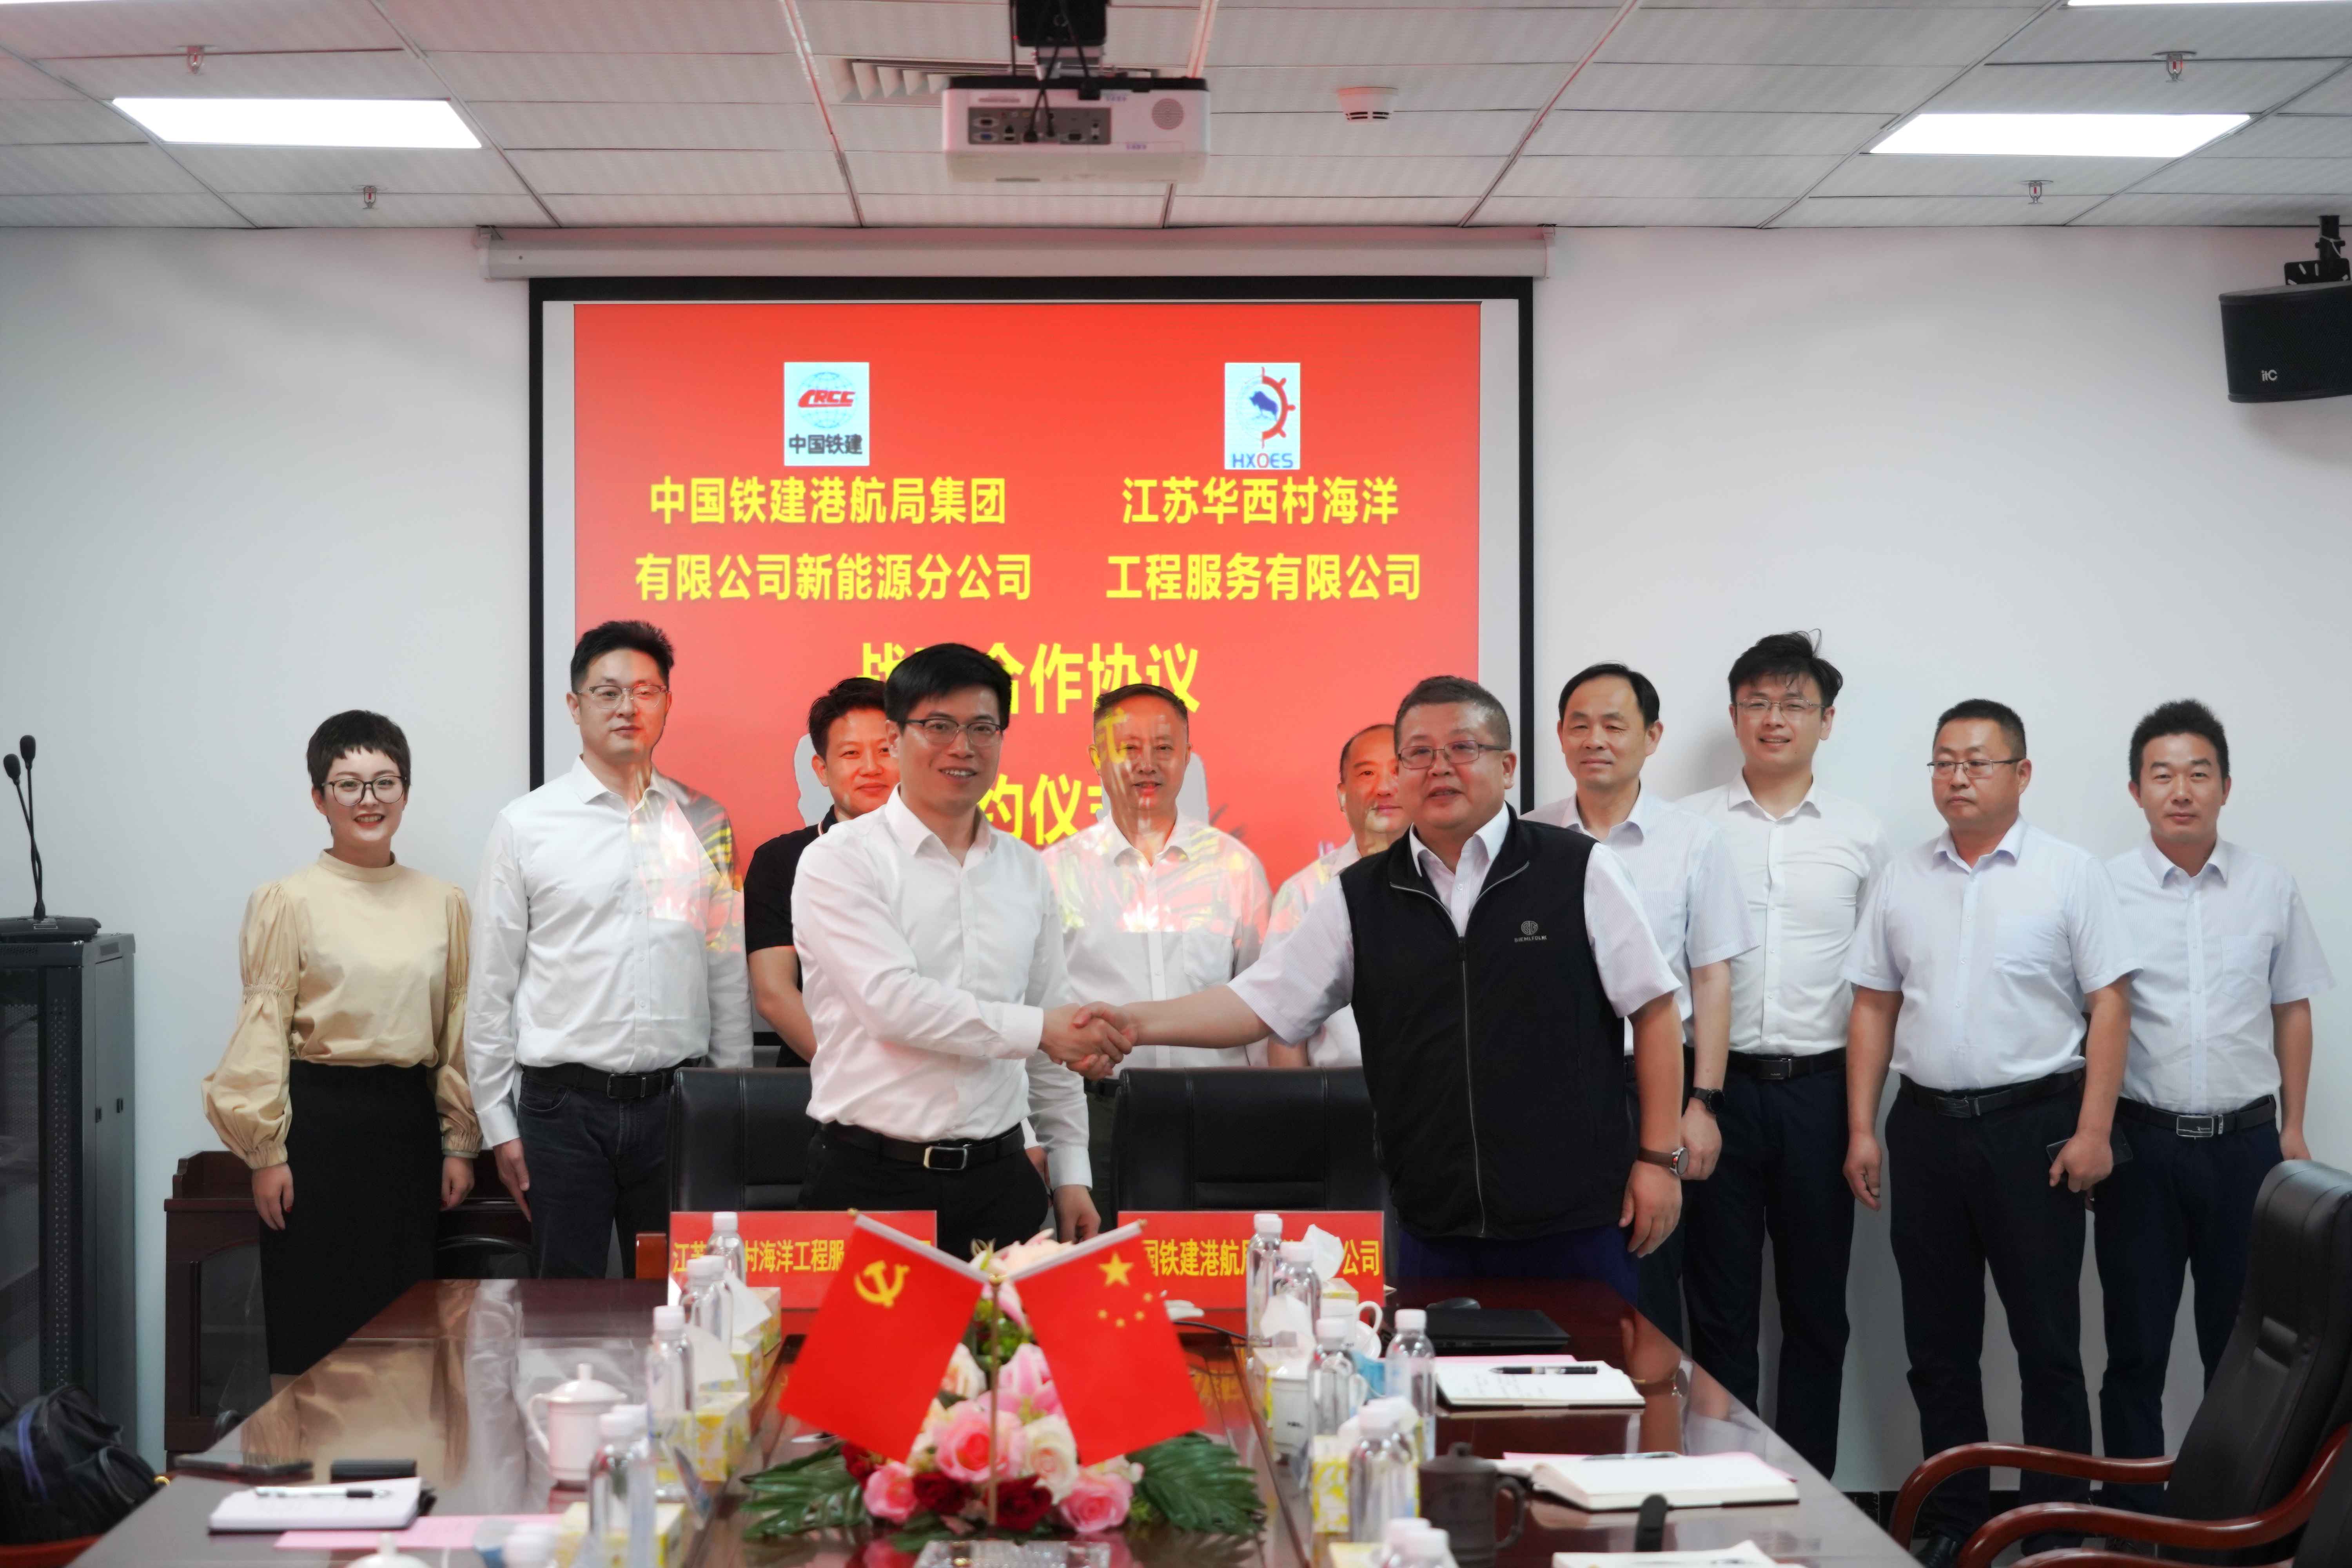 　　West China Offshore Engineering signed a strategic cooperation agreement with the new energy branch of China Railway Construction port and Waterway Bureau